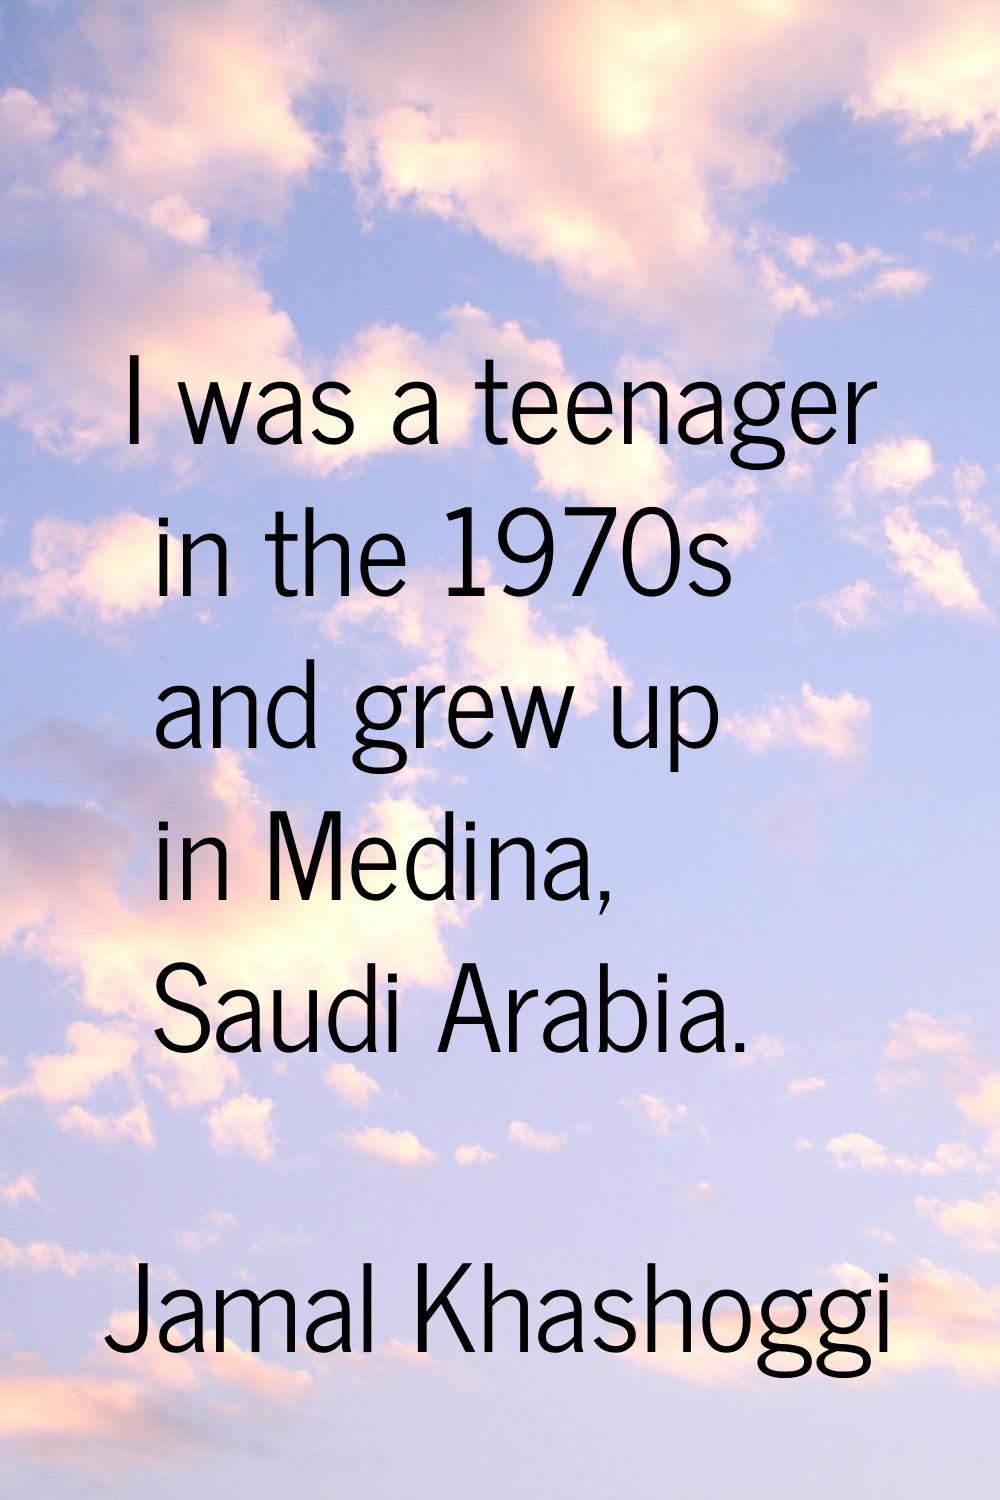 I was a teenager in the 1970s and grew up in Medina, Saudi Arabia.